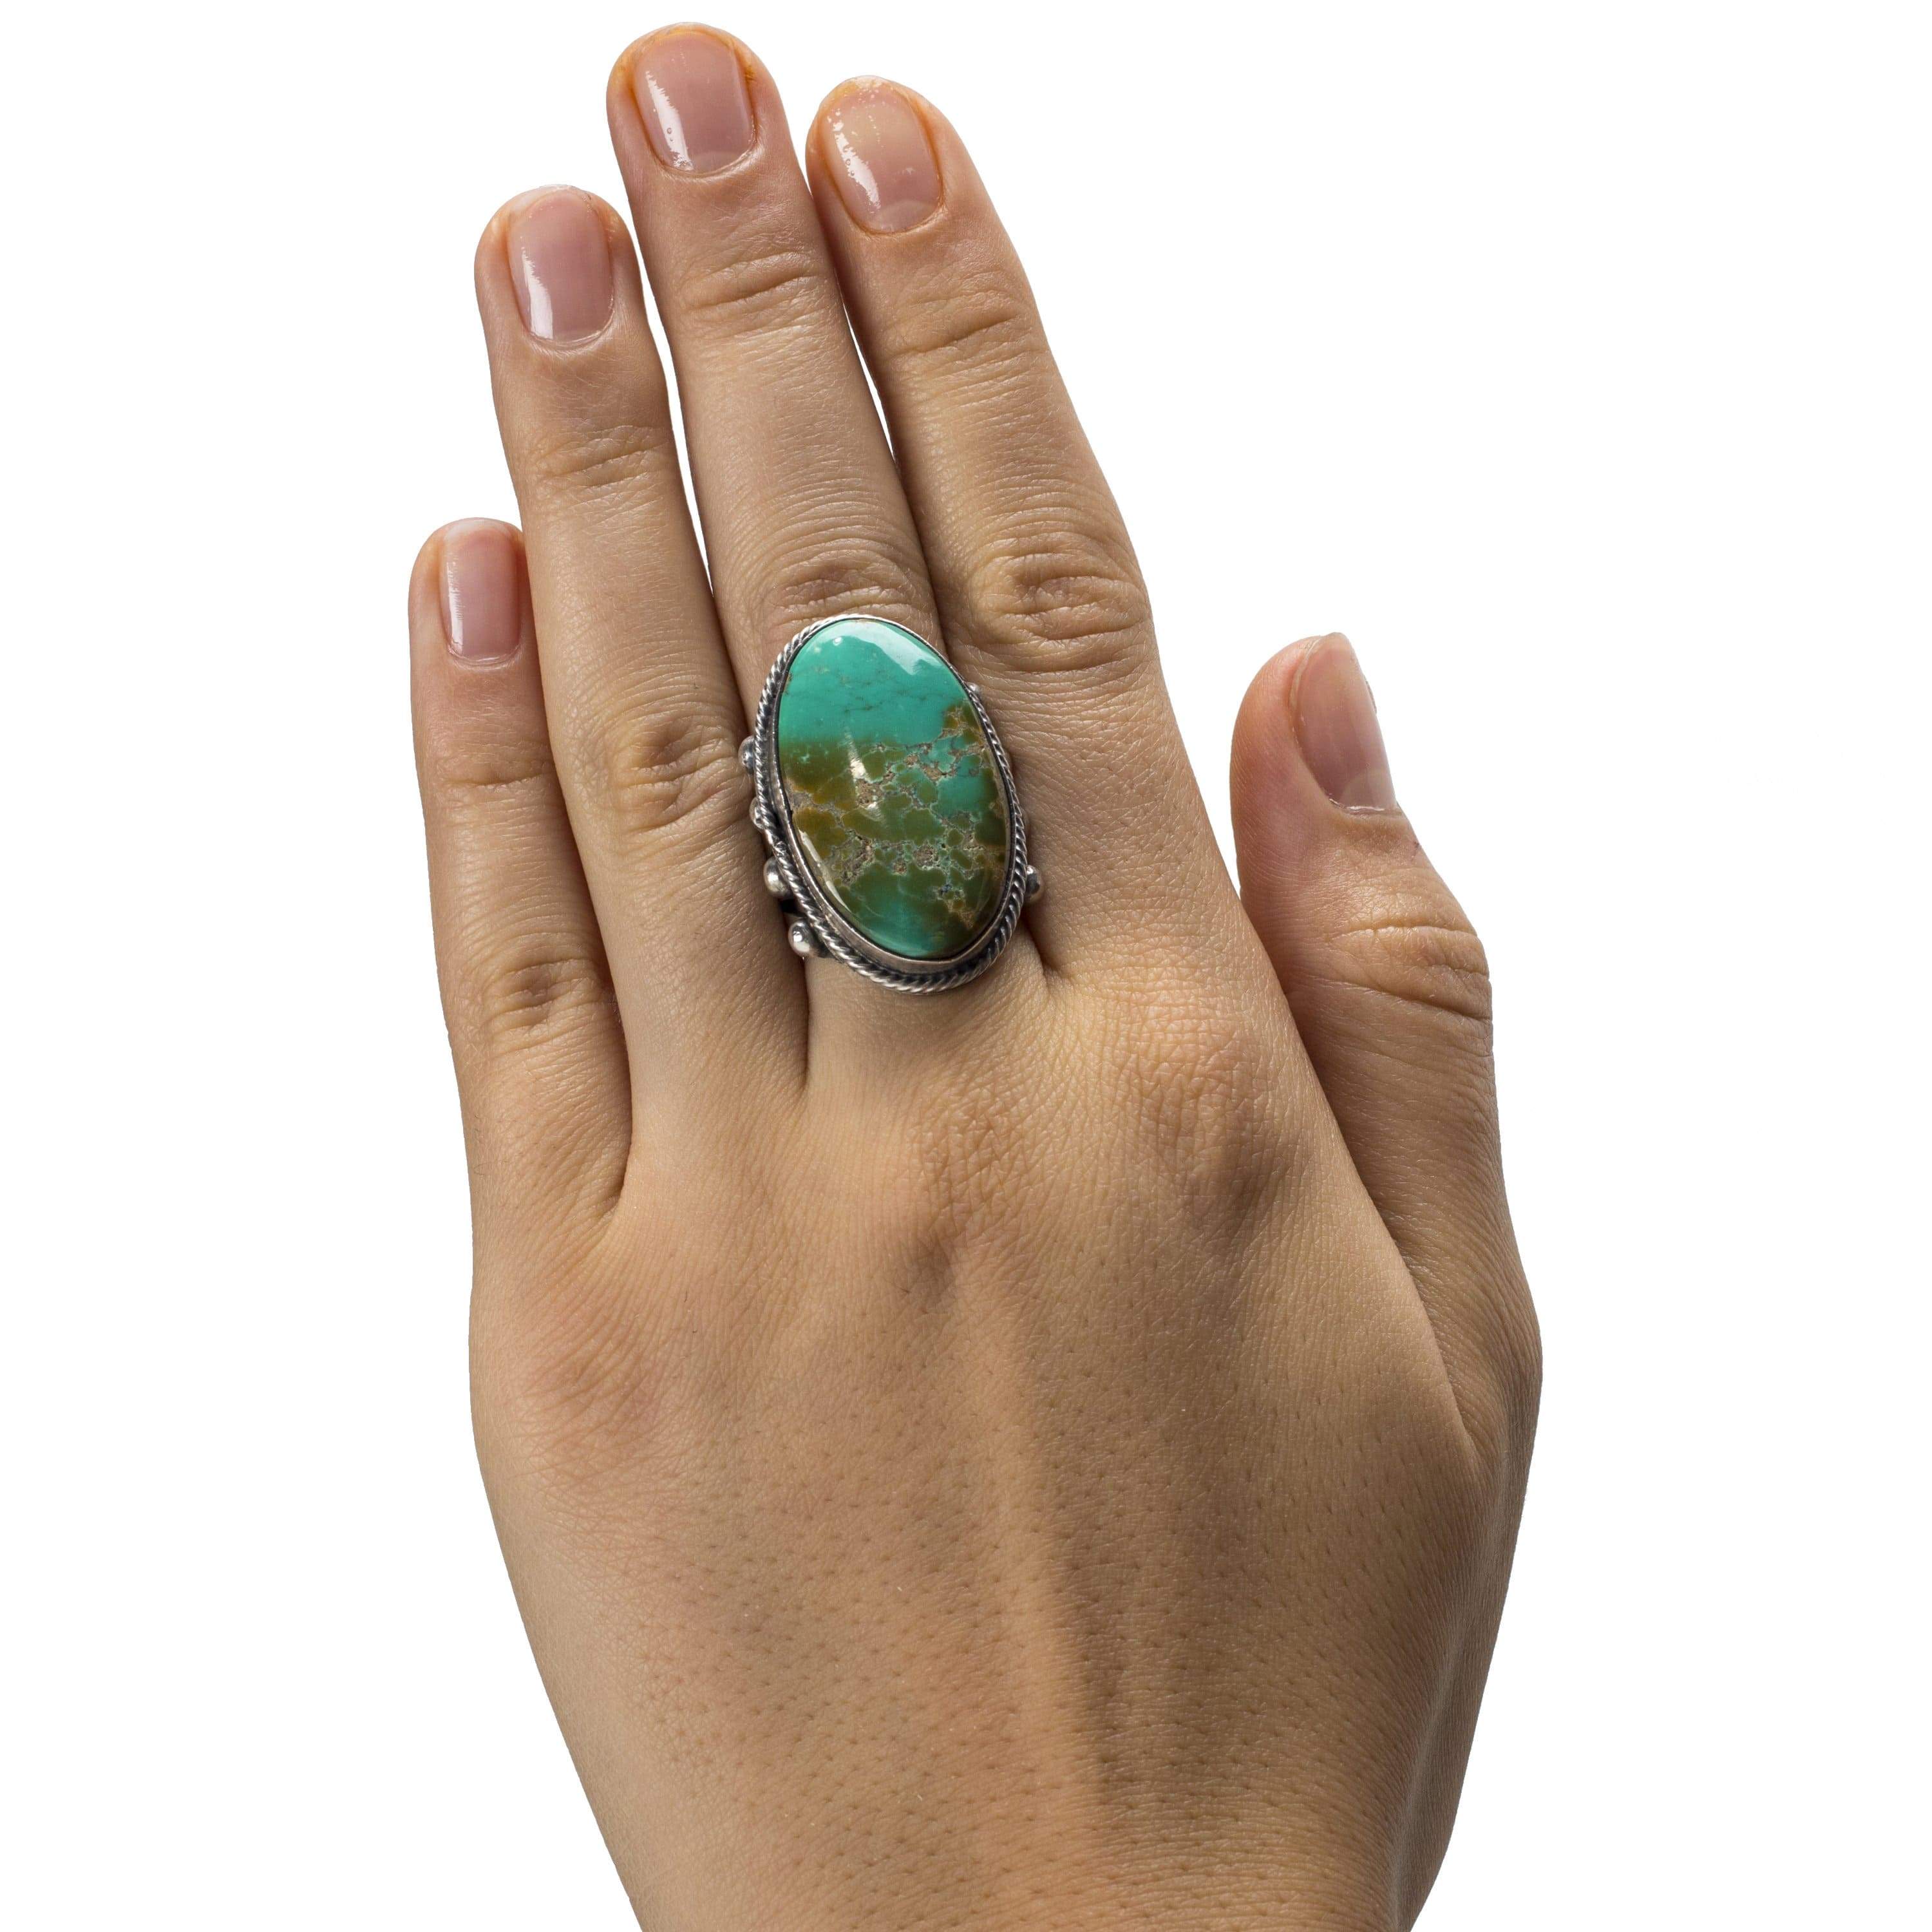 Kalifano Native American Jewelry 7 Ray Bennett Carico Lake Turquoise USA Native American Made 925 Sterling Silver Ring NAR900.014.65